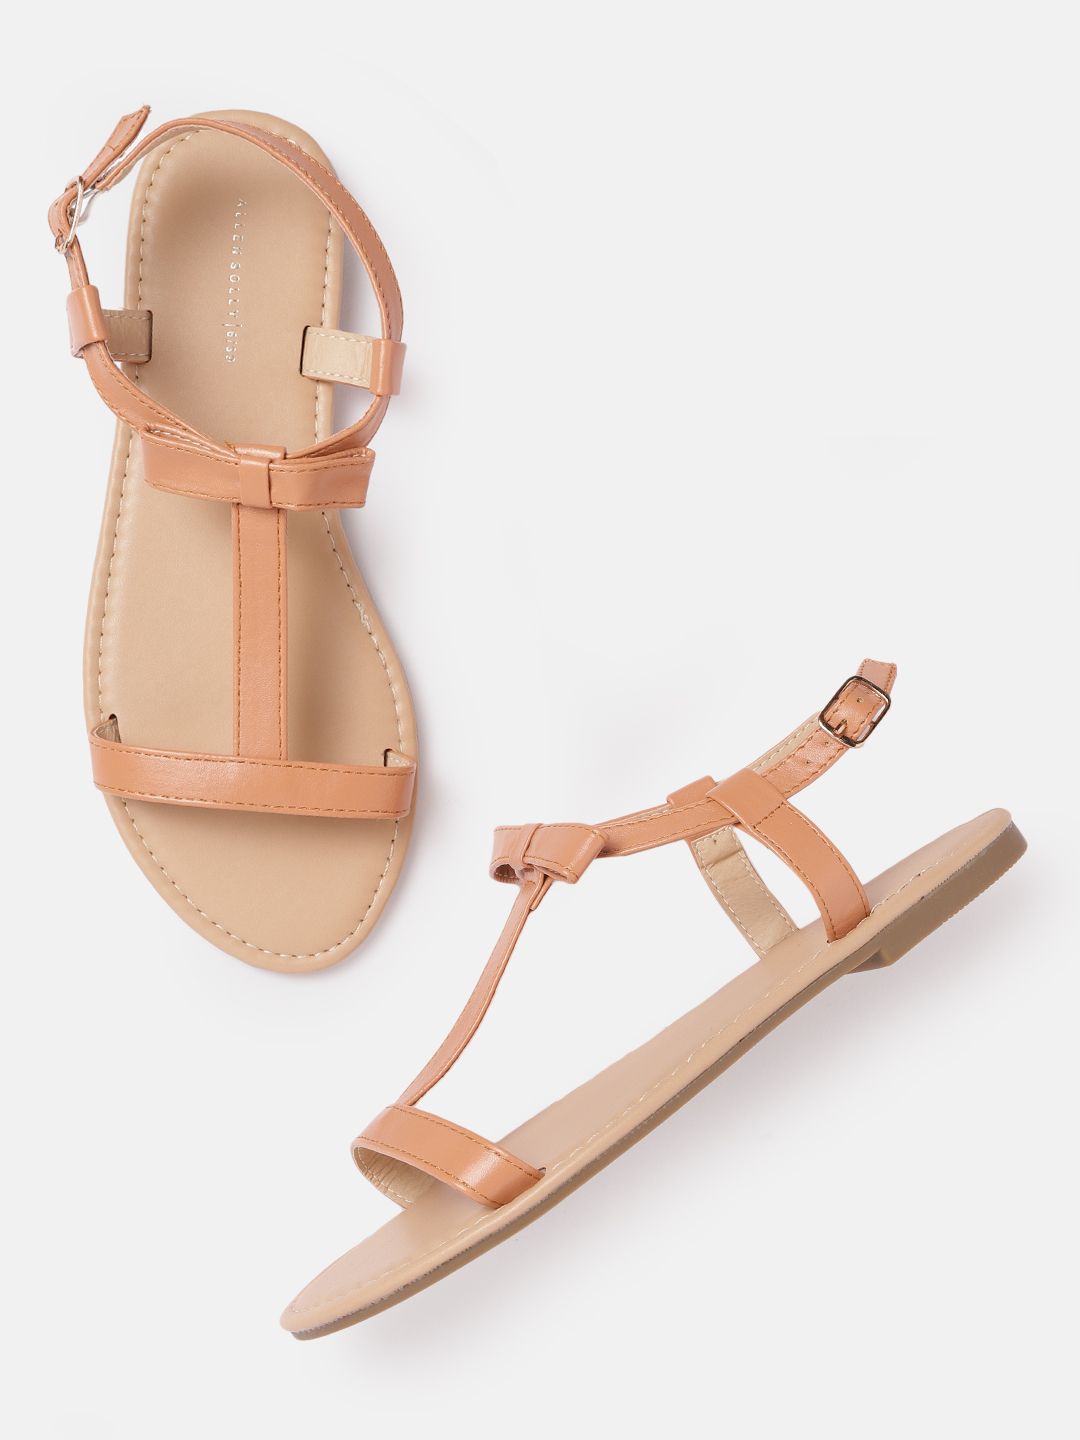 Allen Solly Women Peach-Coloured T-strap Flats with Bows Price in India